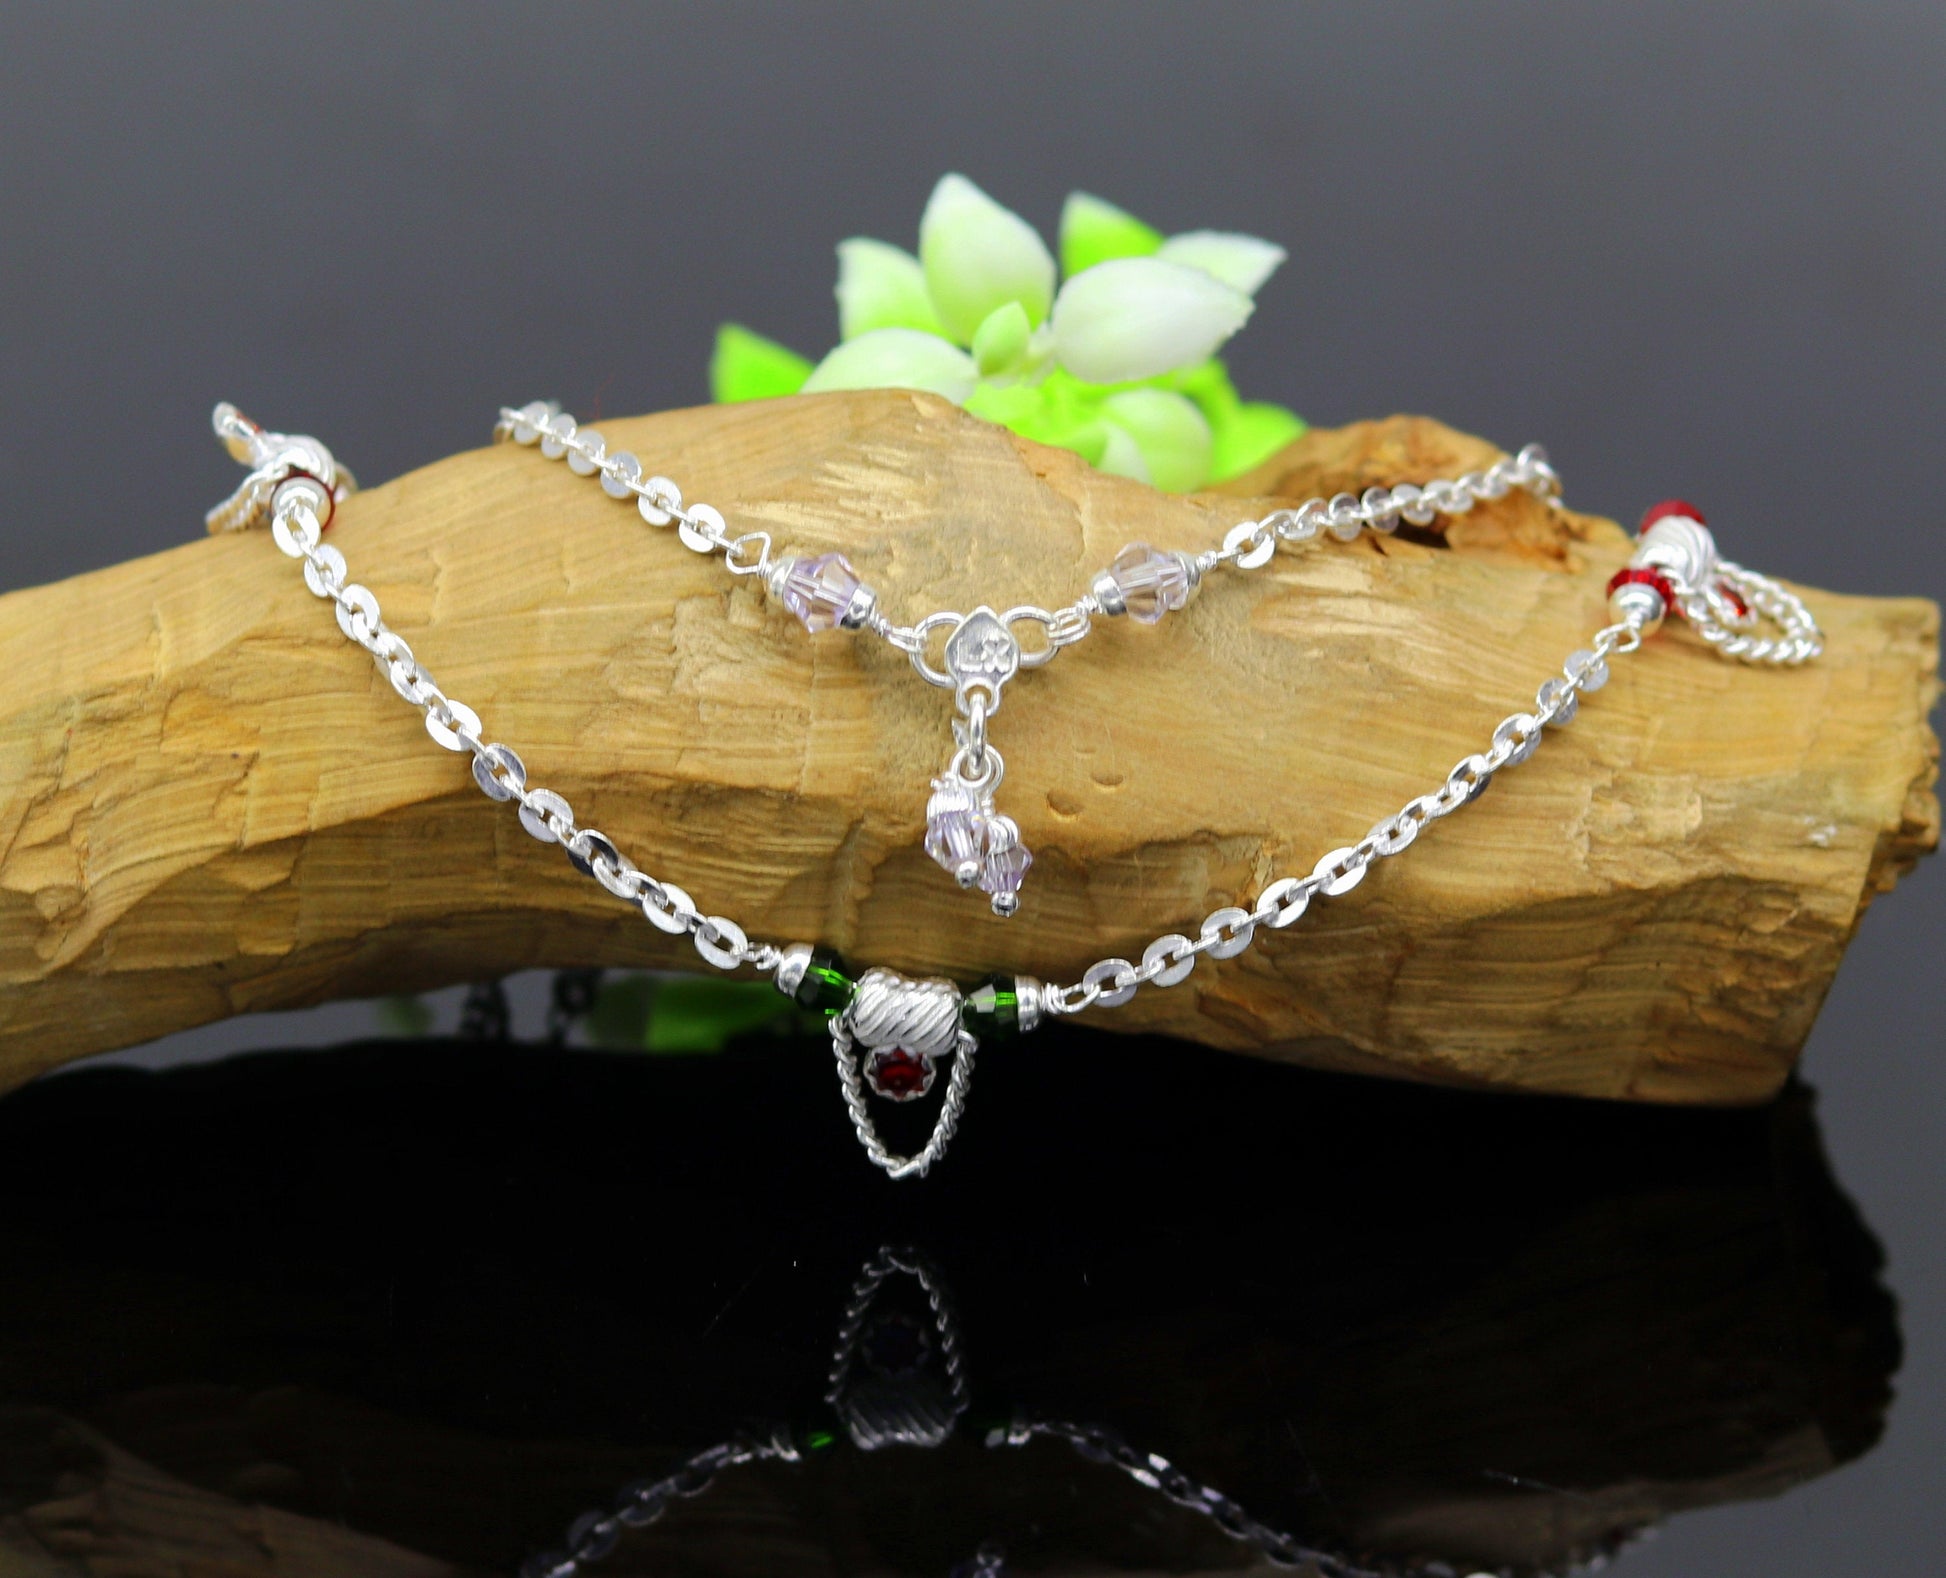 10.5" 925 solid sterling silver gorgeous ankle bracelet, bridesmaid anklets , personalized gifting foot bracelet light weight anklet nank220 - TRIBAL ORNAMENTS